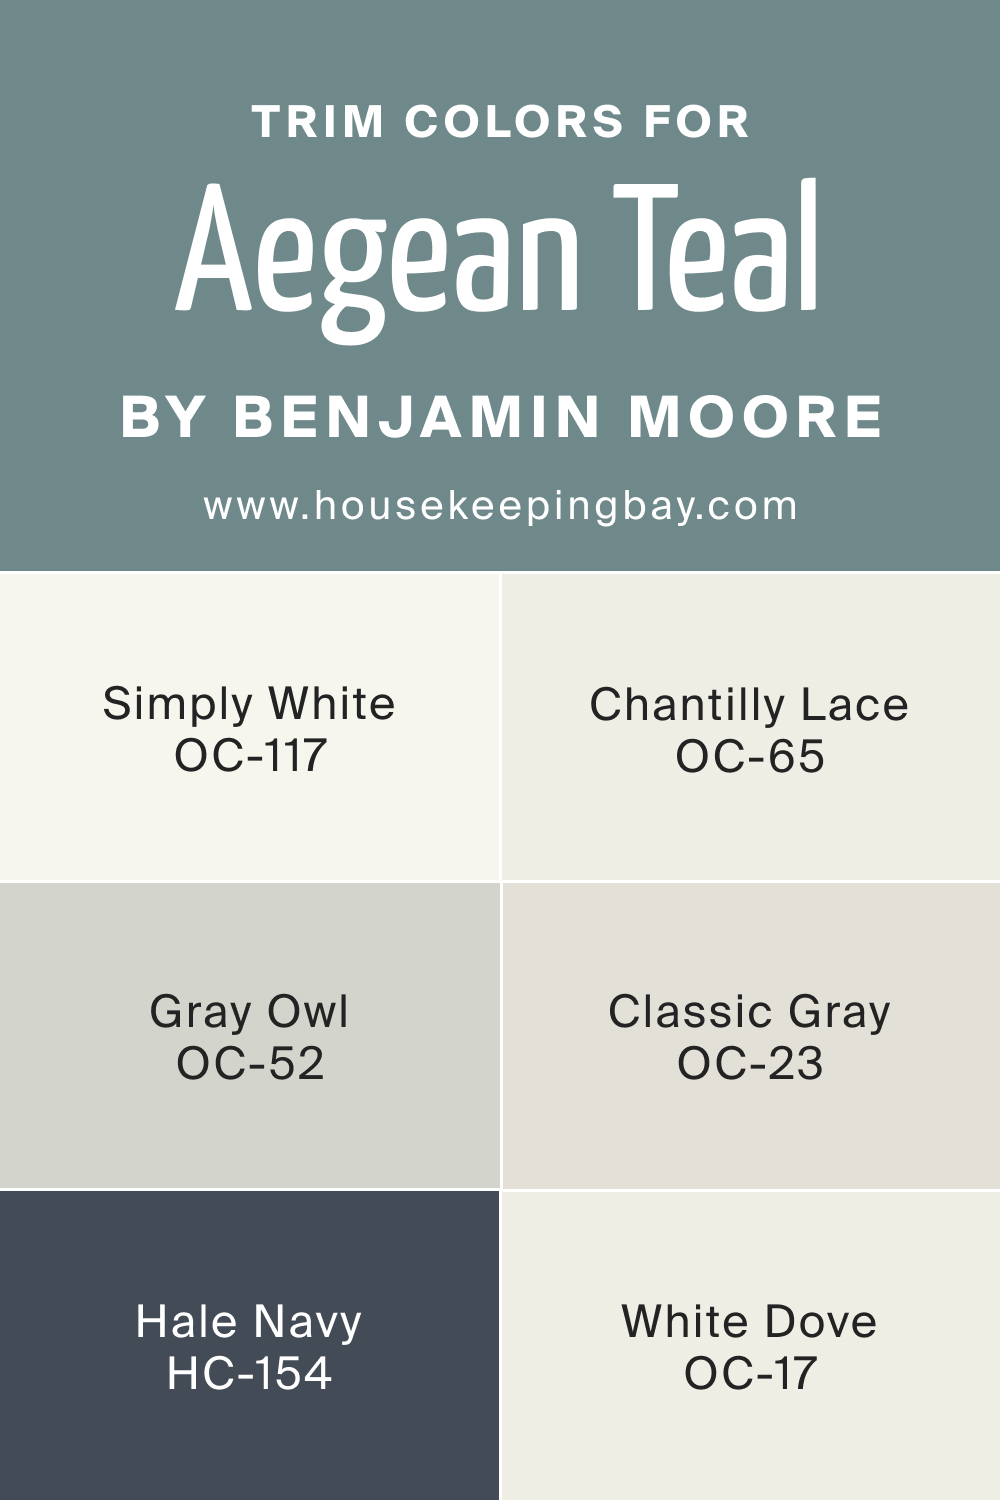 Can Aegean Teal Be Used As a Trim Color